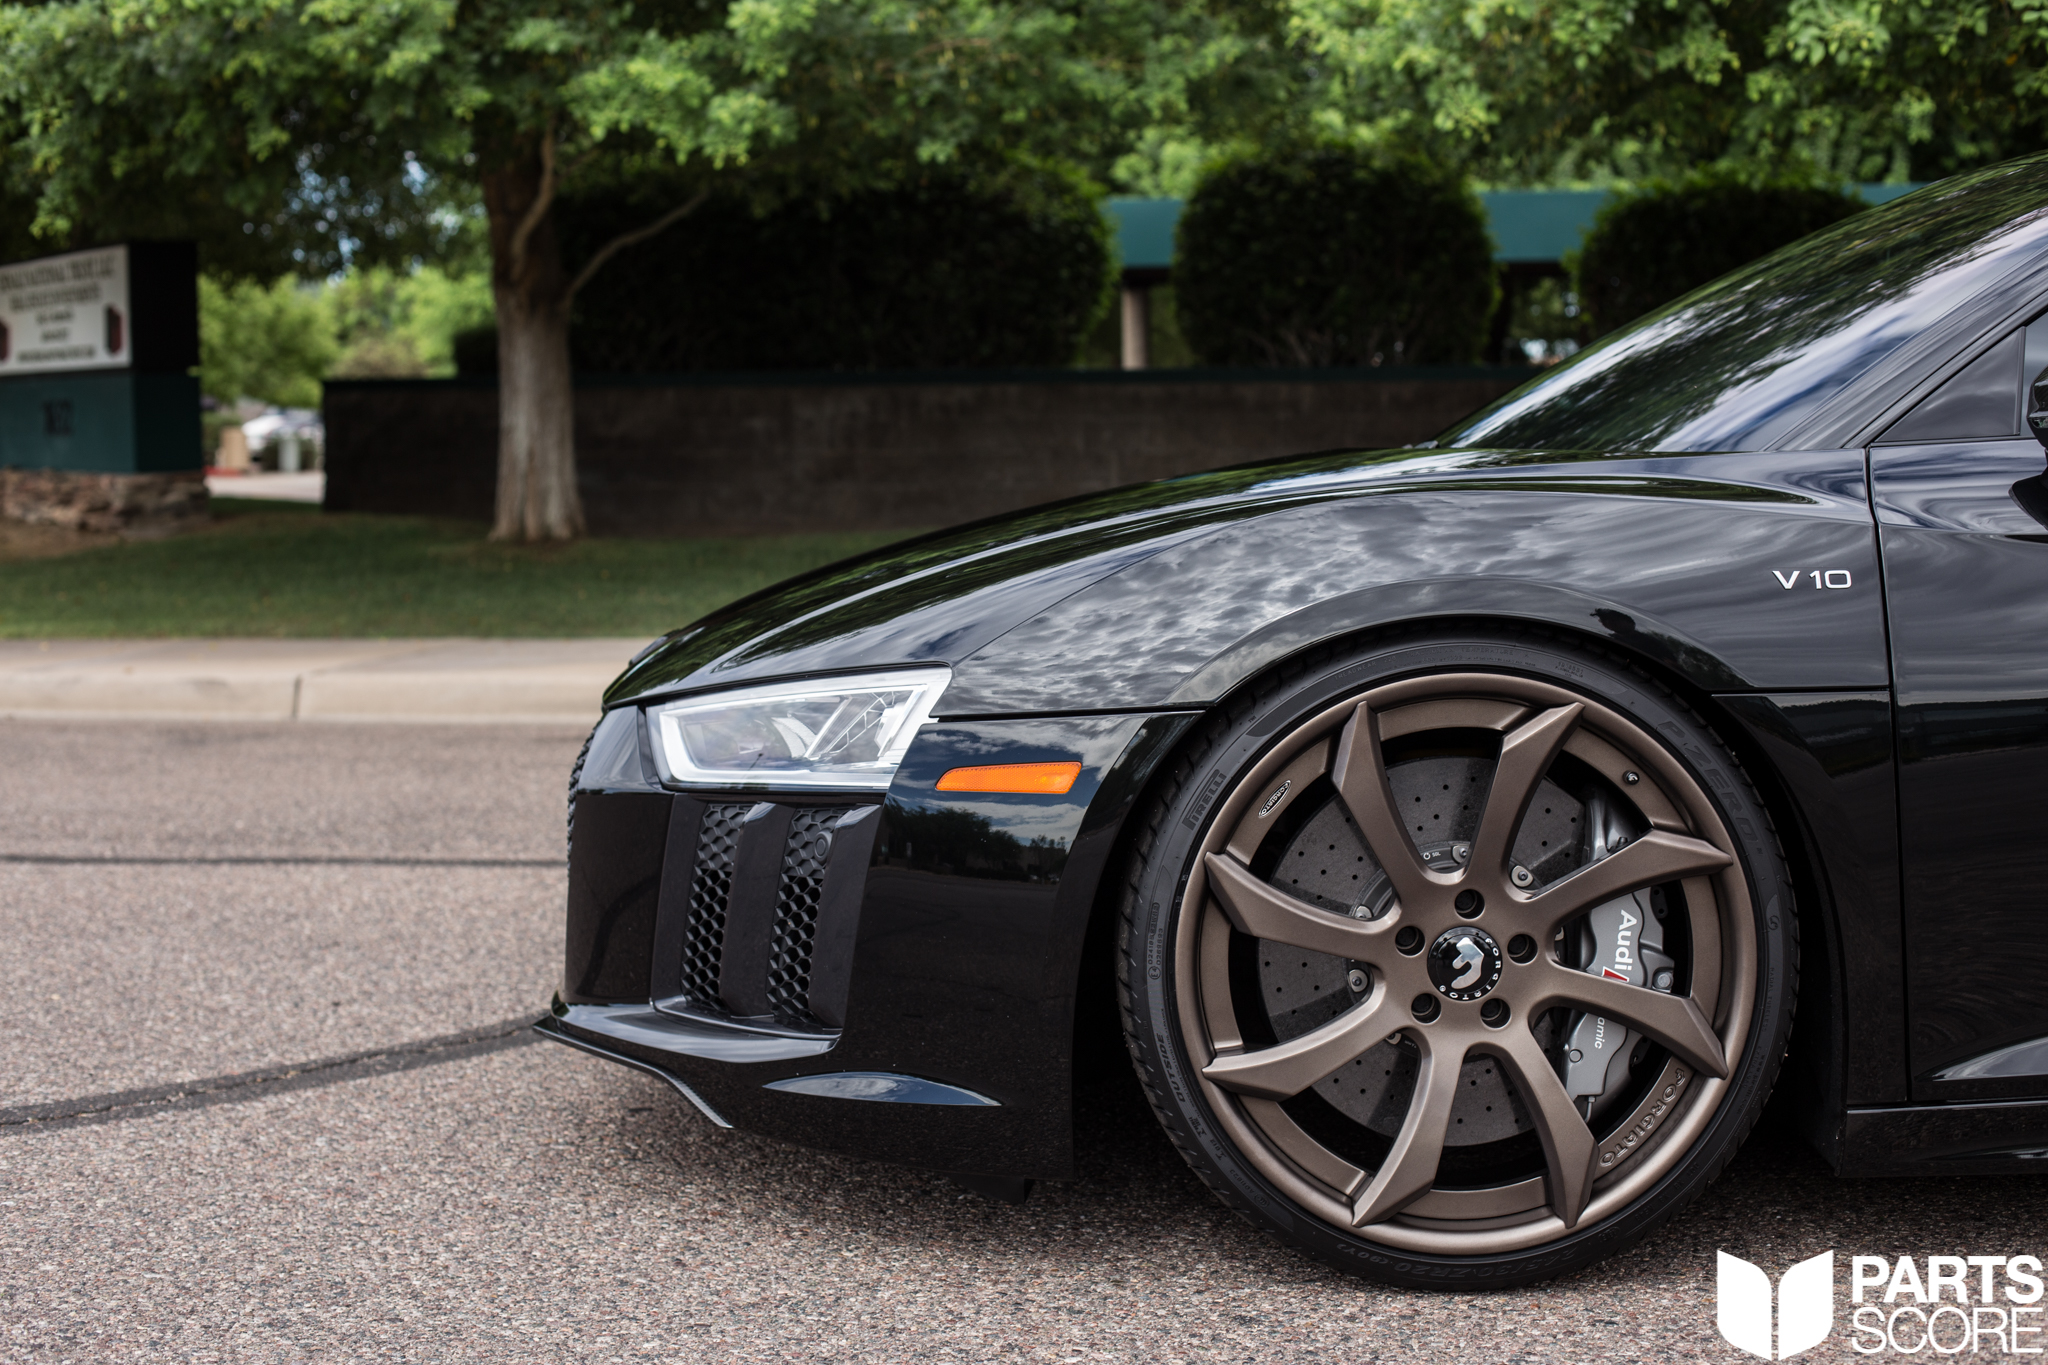 205mph, 605hp, all wheel drive, audi r8, audi r8 coilovers, audi r8 modifications, audi r8 mods, audi r8 shock failure, audi r8 v10, audi r8 v8, audi rs, audir8, awd, Coilovers, coils, height adjustable spring, hyper car, parts score, partsscore, quattro, r8, r8 coilovers, r8 lms, r8 springs, r8 suspension, r8 v10 +, r8 v10 coilovers, r8 v10 h.a.s. kit, r8 v10 has kit, r8 v10 height adjustable spring kit, r8 v10 plus, r8 v10 plus mods, r8 v10 springs, r8 v8 coilovers, r8 v8 has kit, r8 v8 springs, r8racecar, r8v10+, r8v10plus, r9v10, race, racecar, racing, slammed, Springs, stance, super car, supercar, track, track day, v10 plus mods, v8 v10